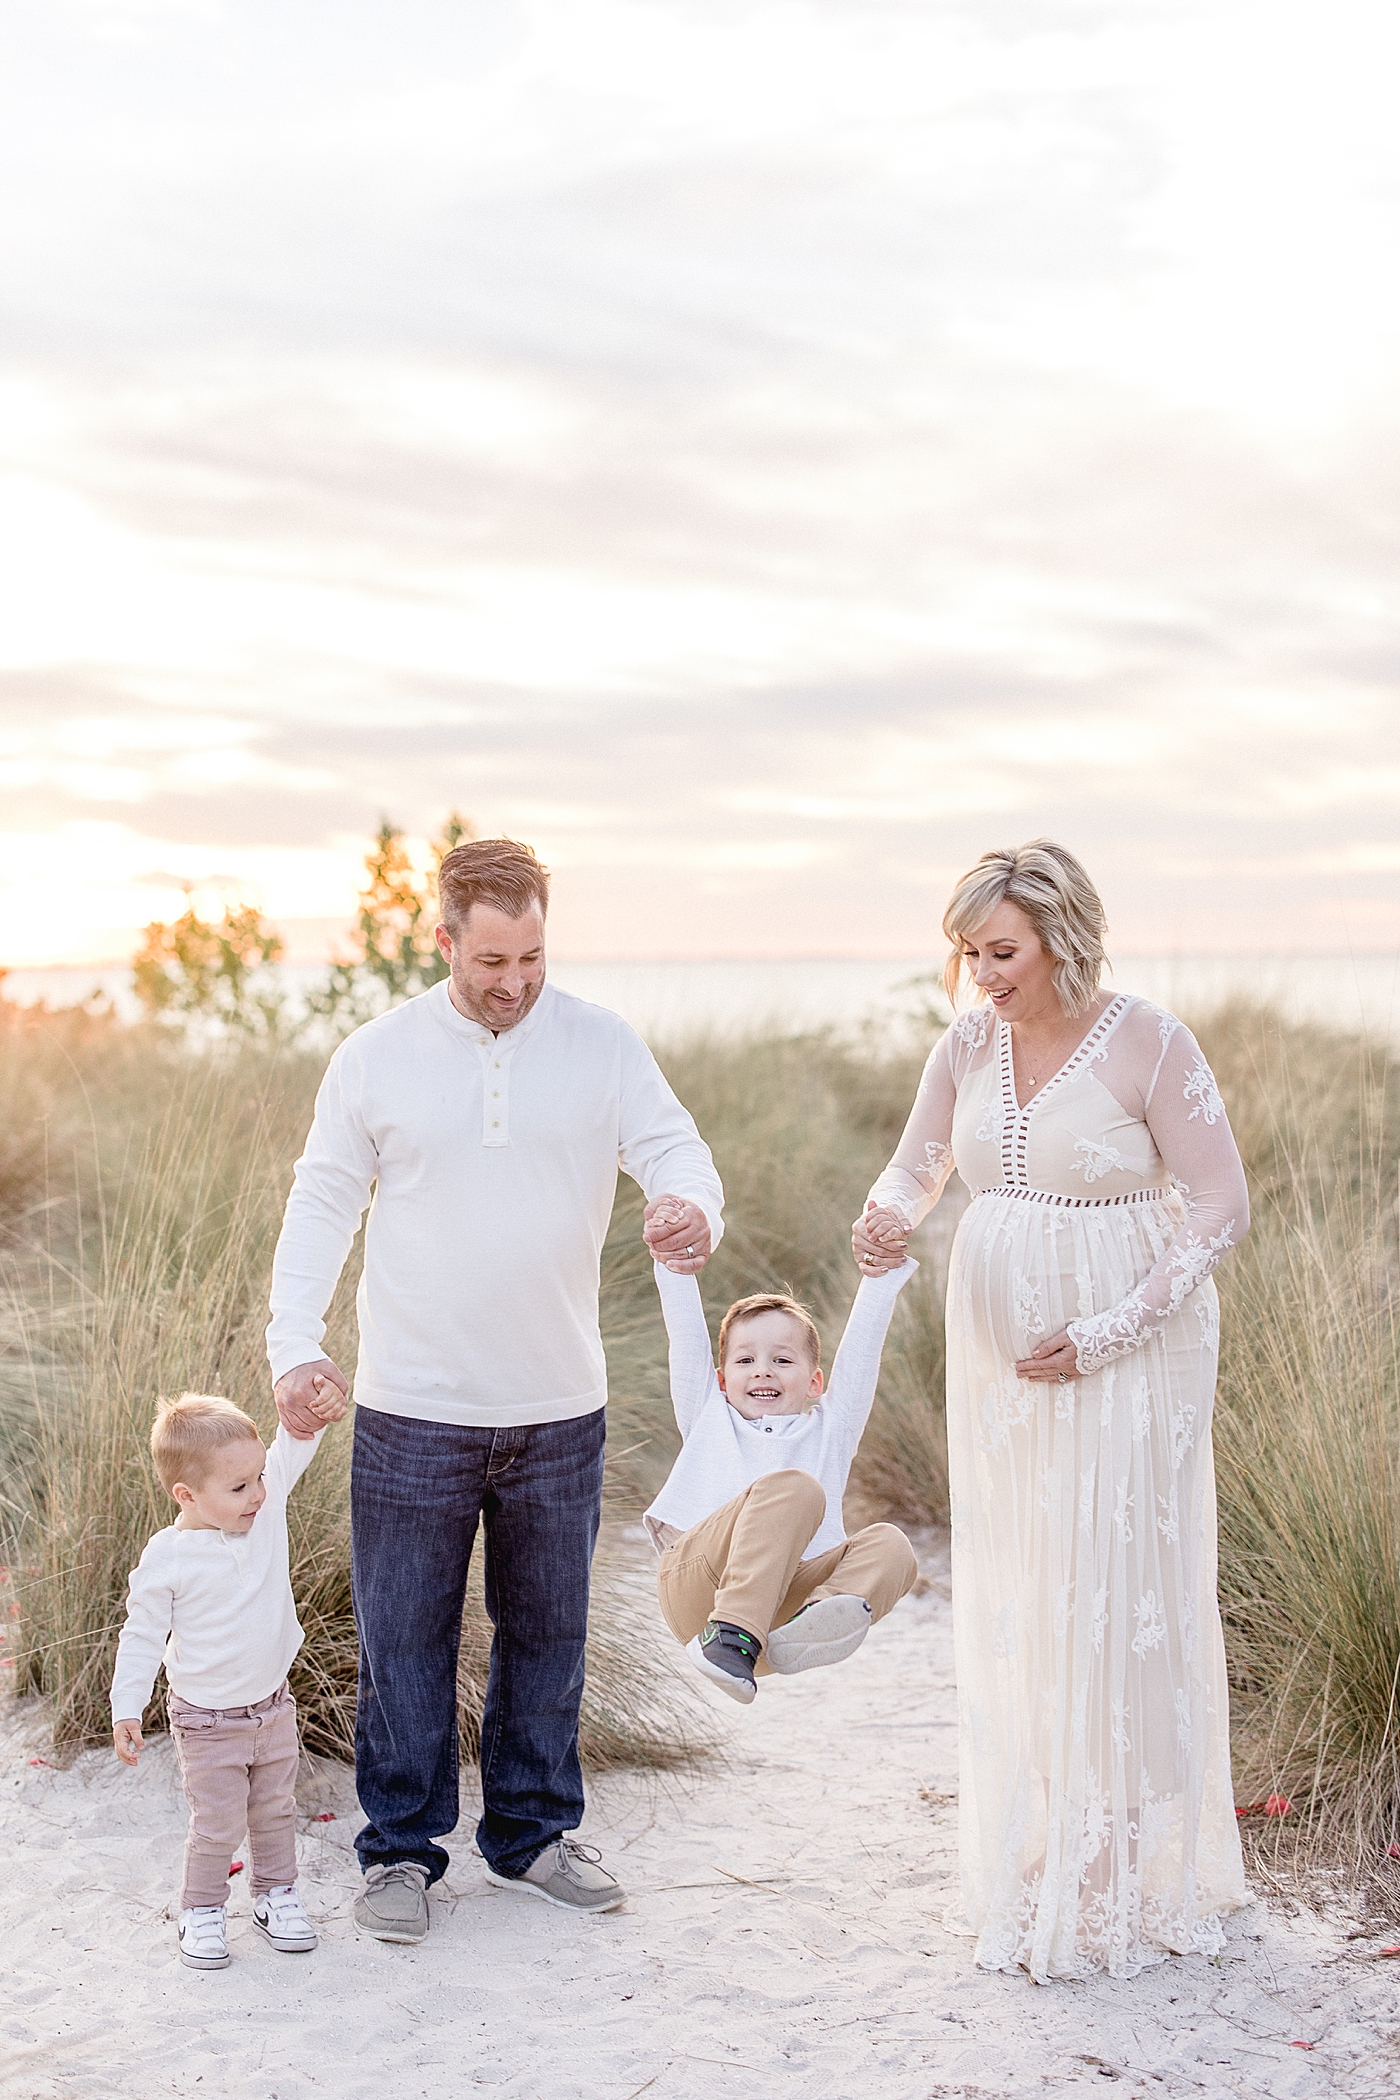 Family walking and swinging one son while the other looks at him. Photo by Brittany Elise Photography.